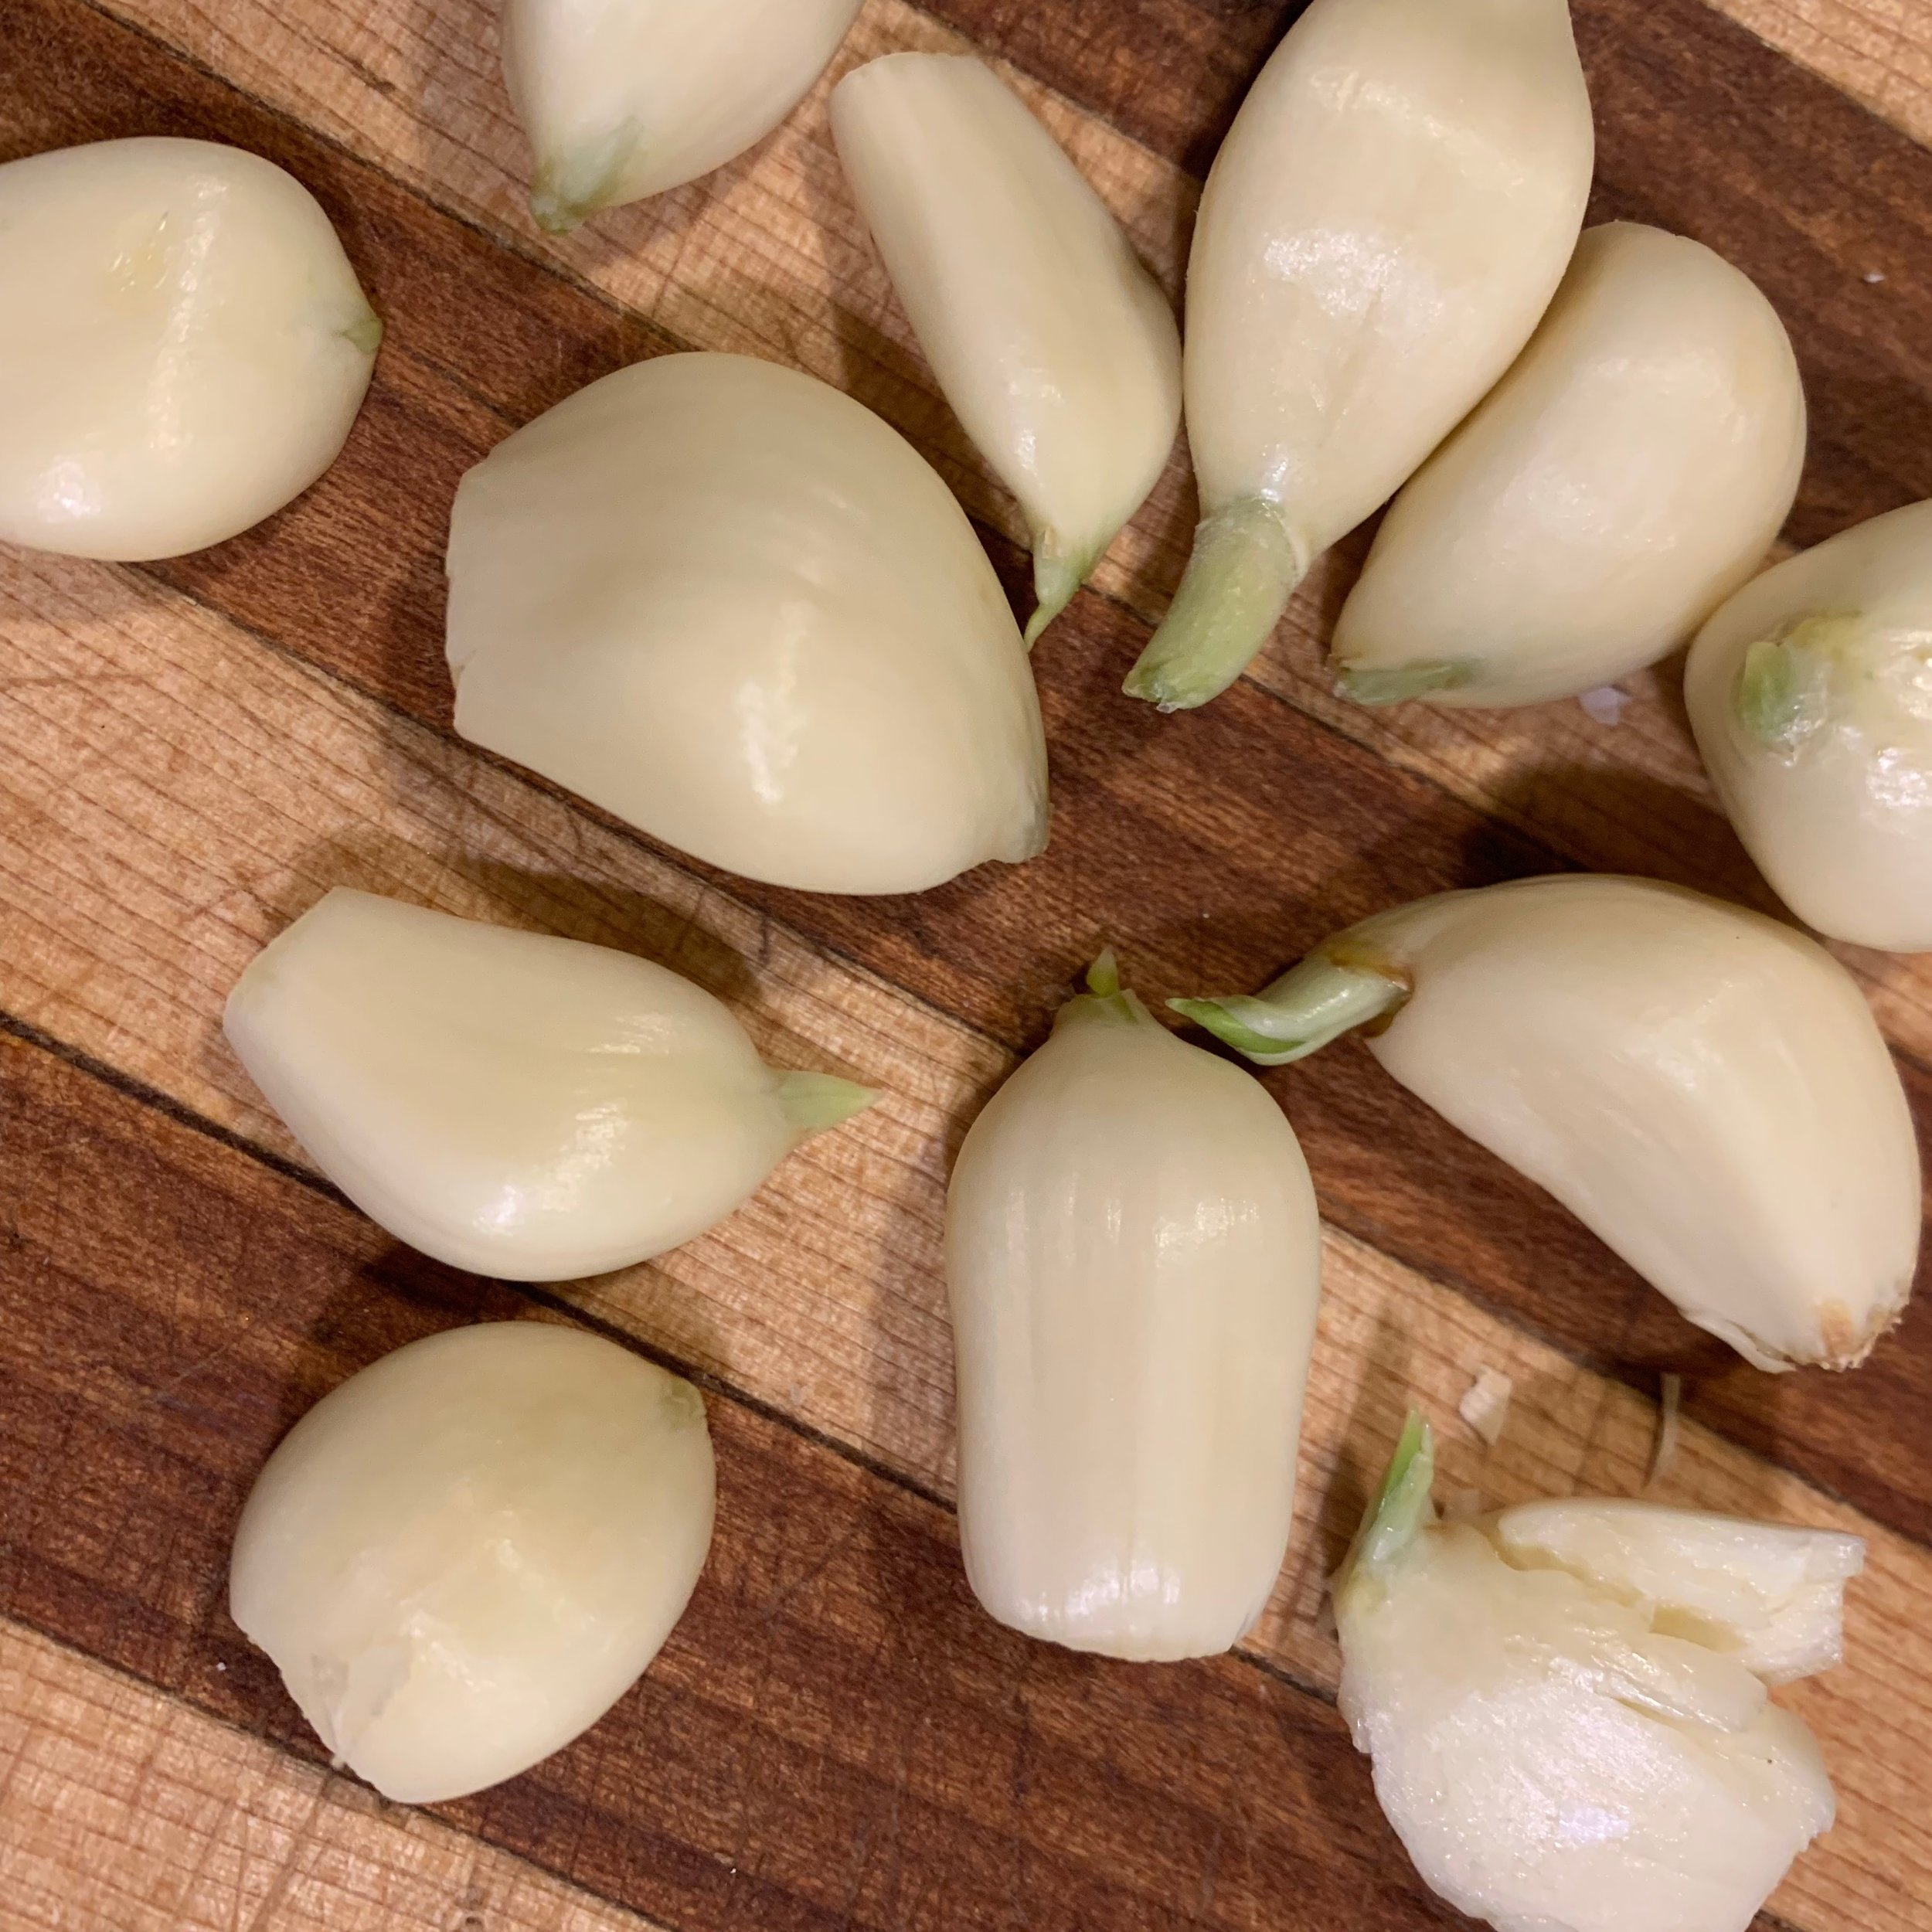 spouted garlic has extremely bio-available nutrients